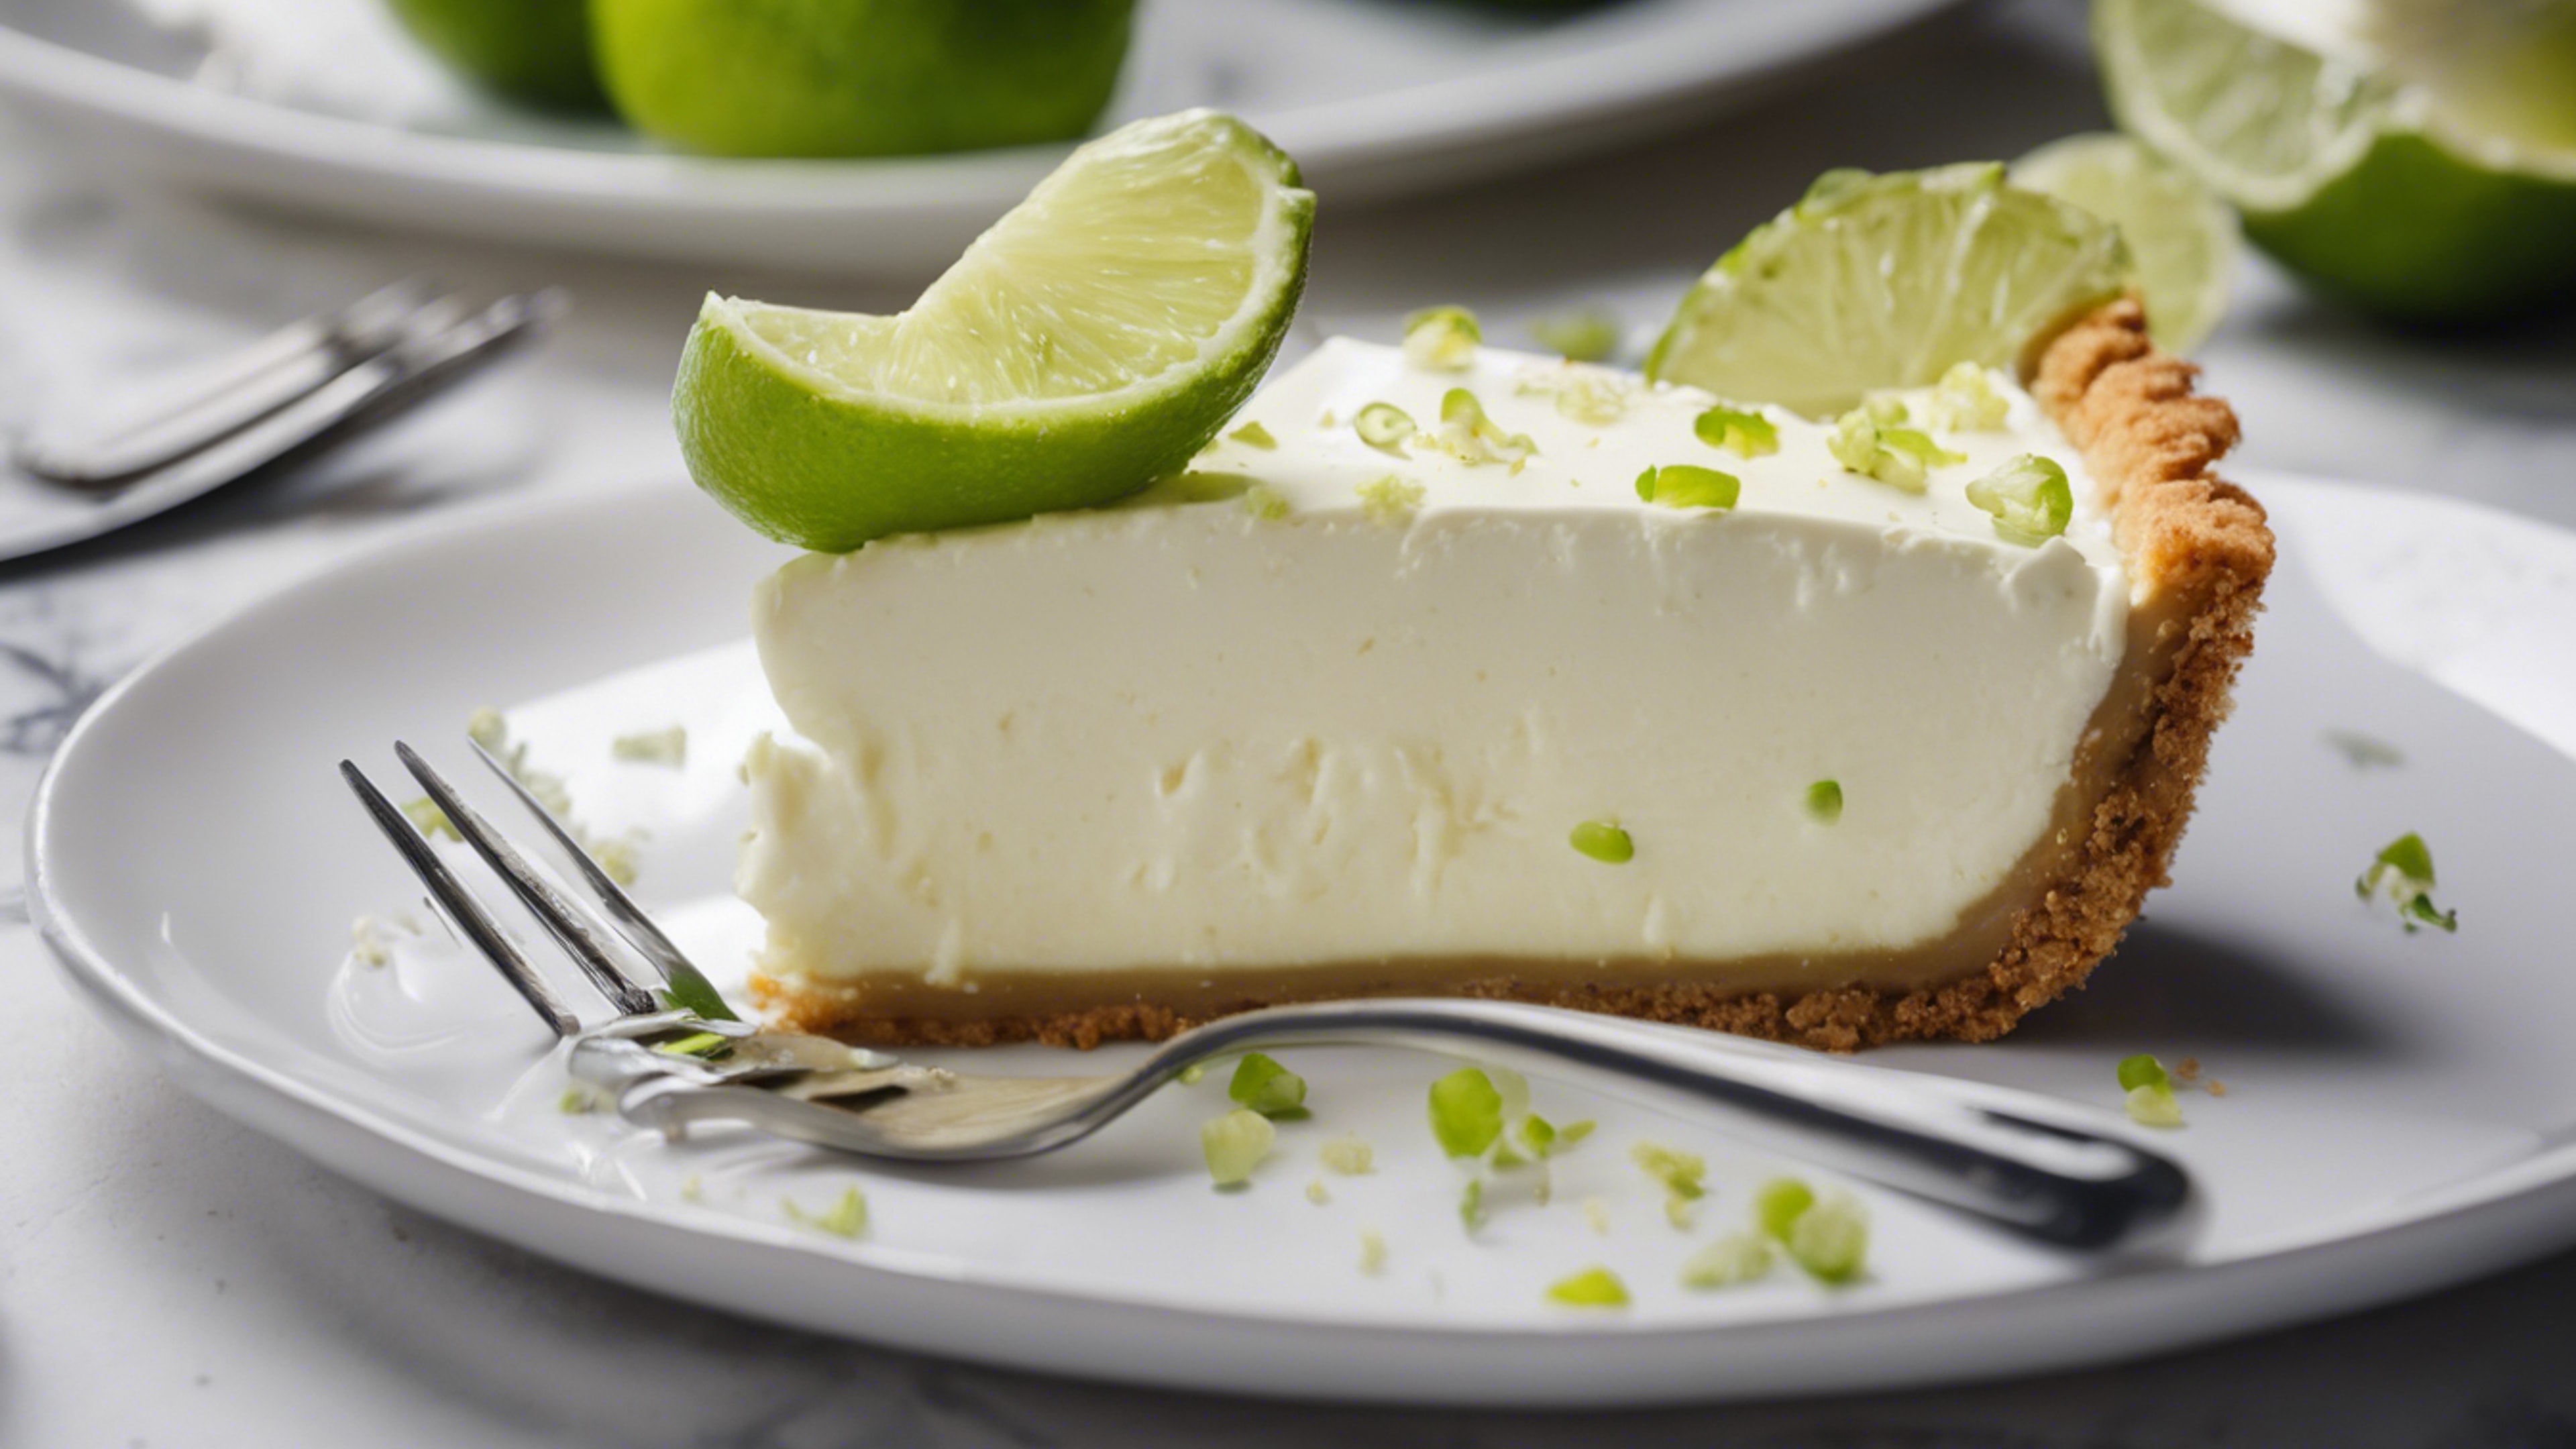 Delicious key lime pie served on a white ceramic plate with a silver fork. کاغذ دیواری[dc9d1e1923f243919b66]